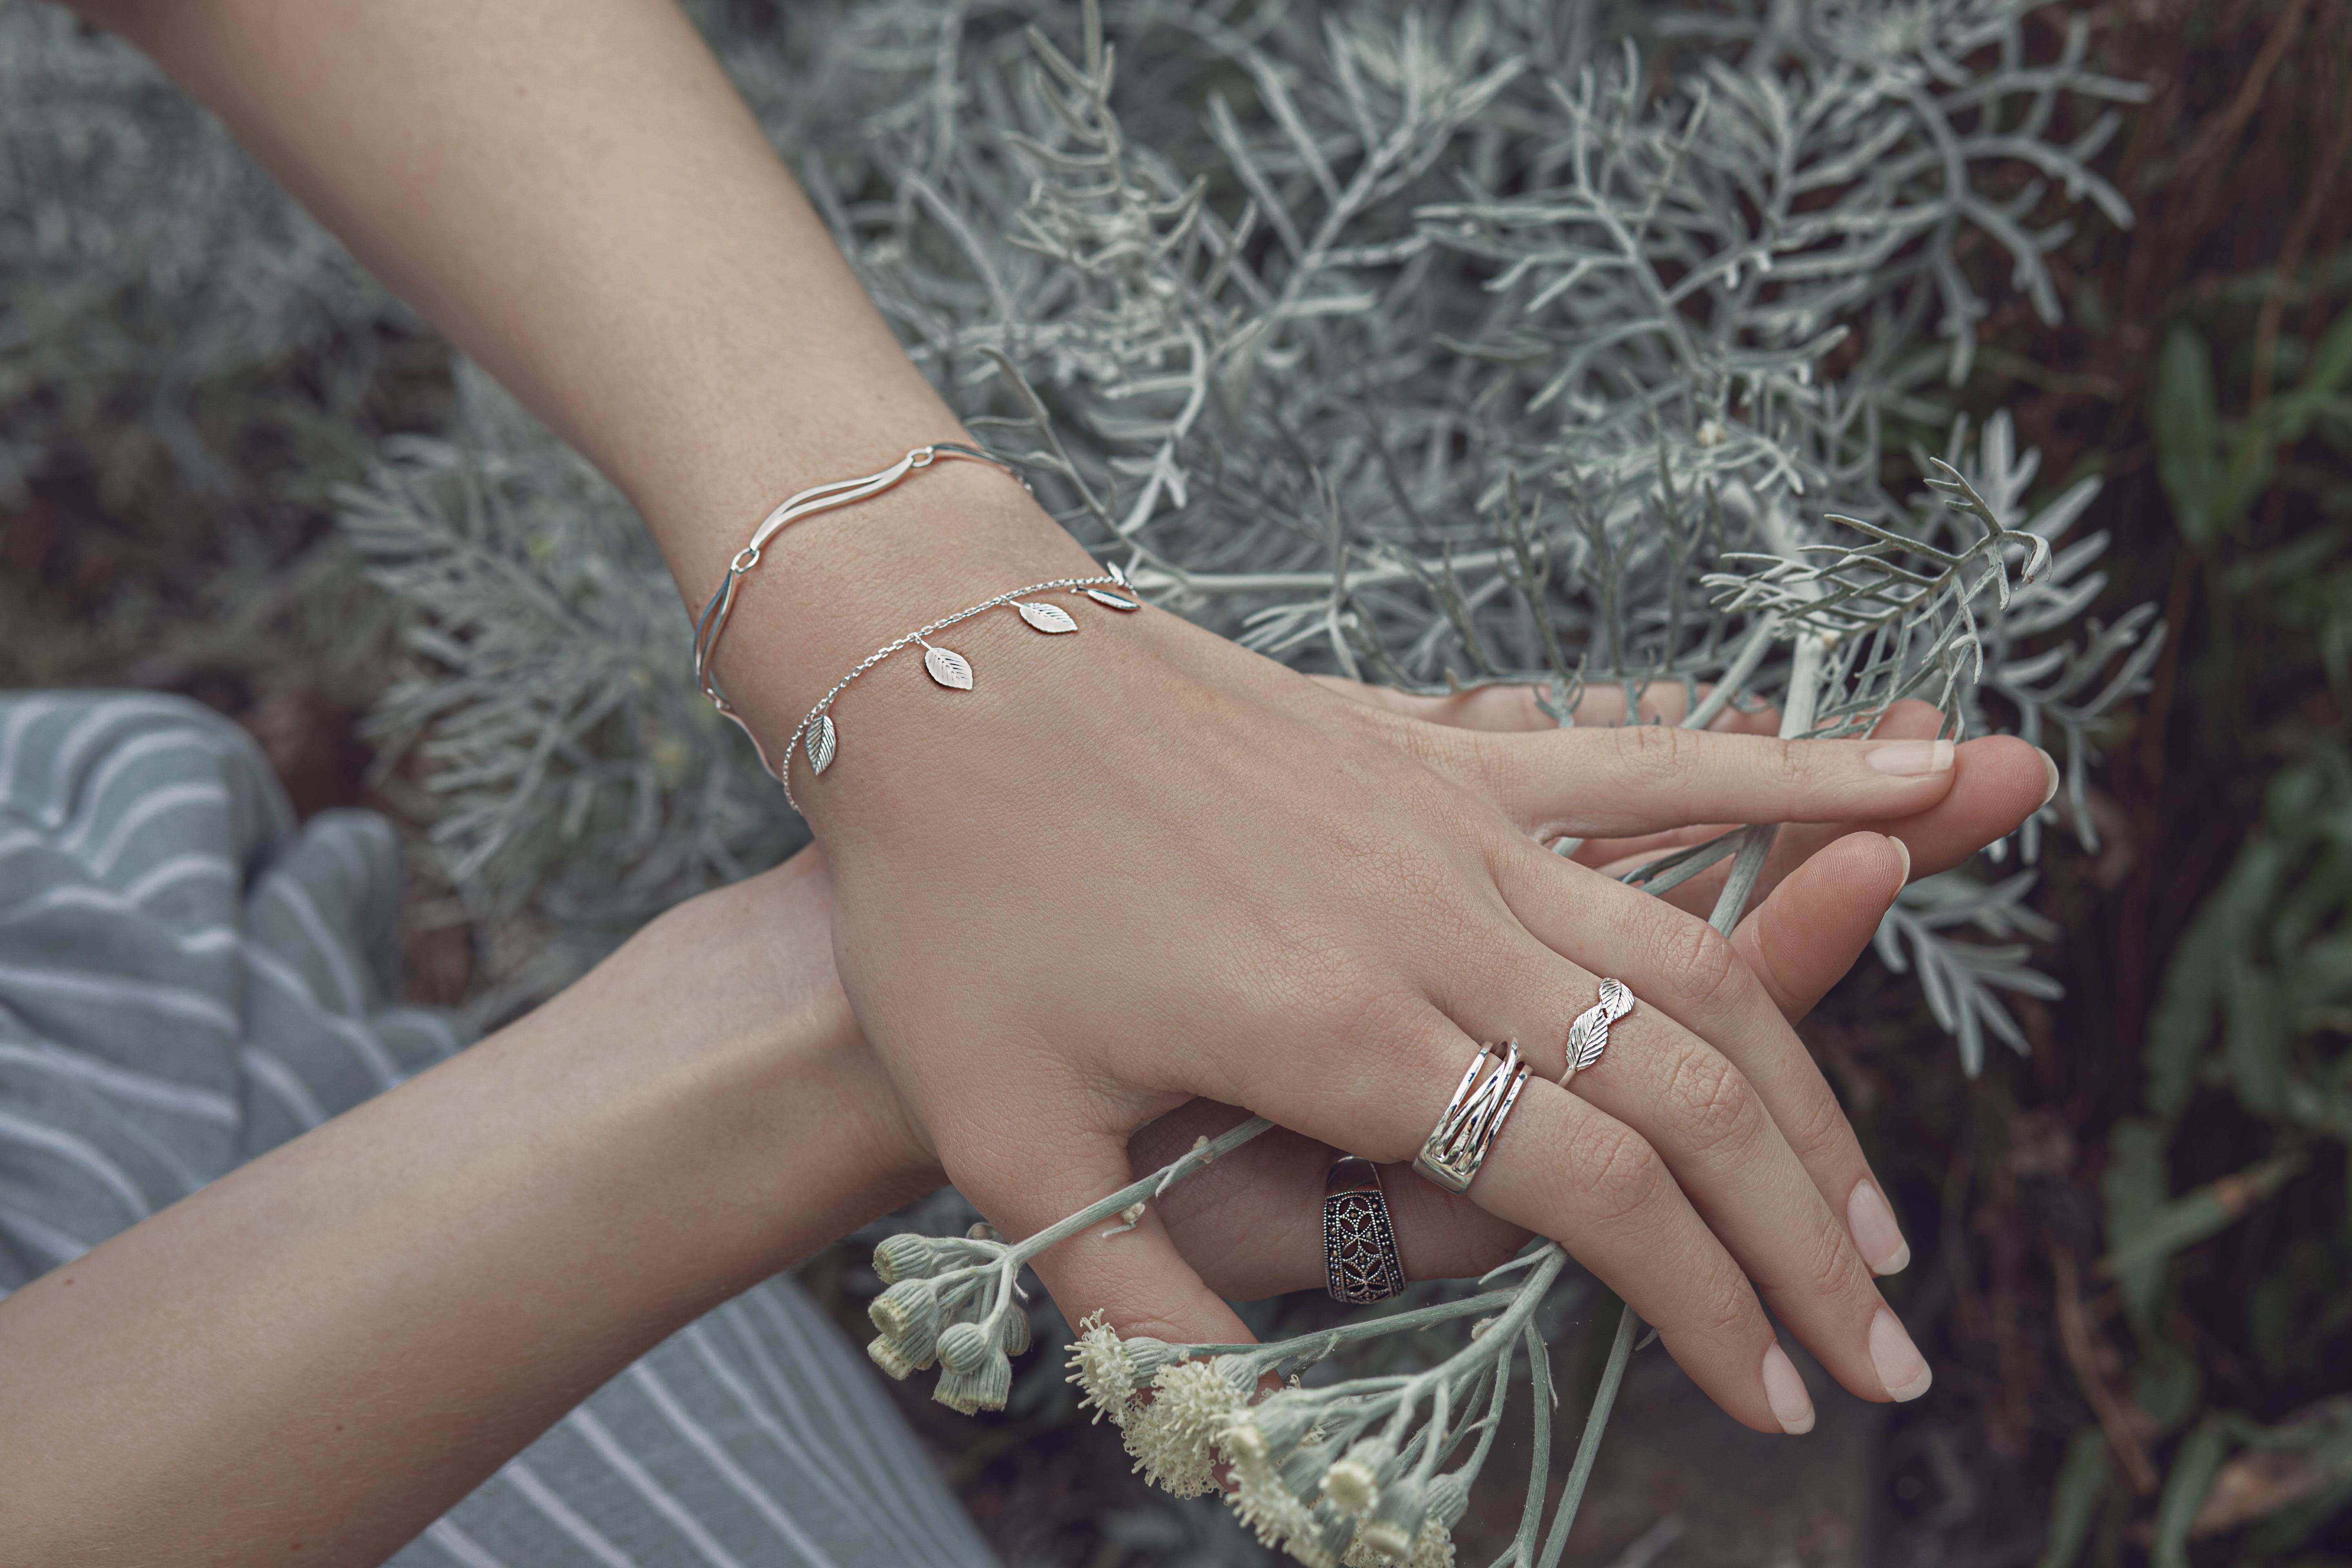 A ladies hands showcasing beautiful sterling silver designer bracelets and rings.